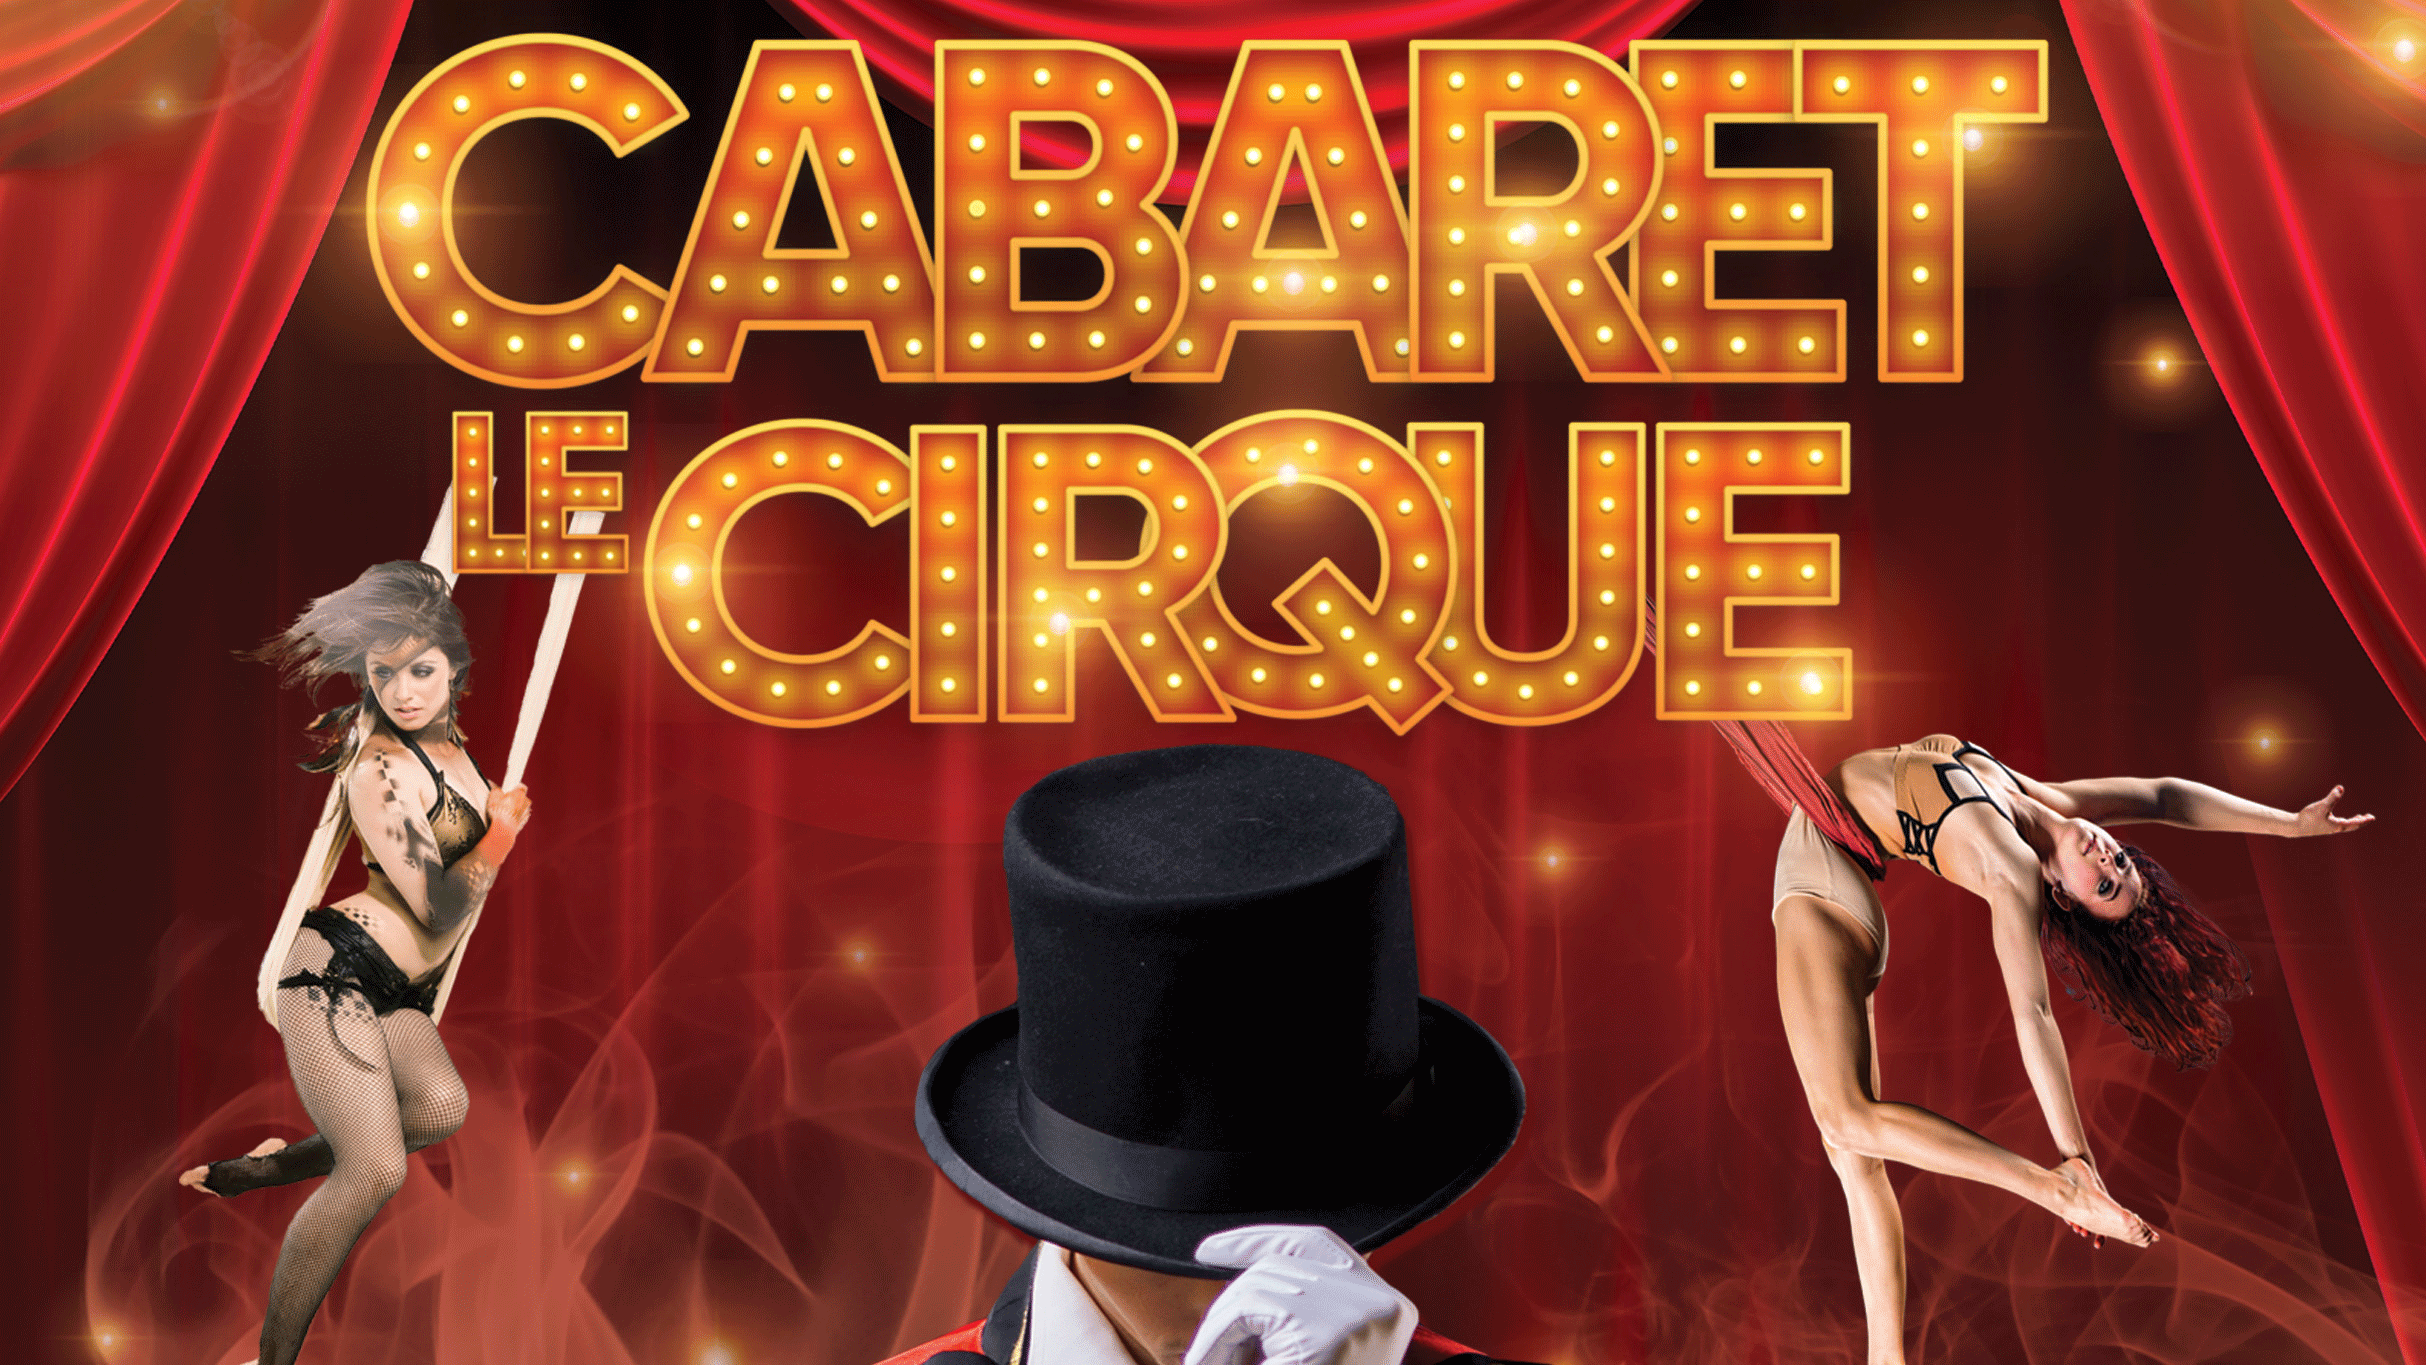 Cabaret Le Cirque in Niagara Falls promo photo for OLG Stage presale offer code